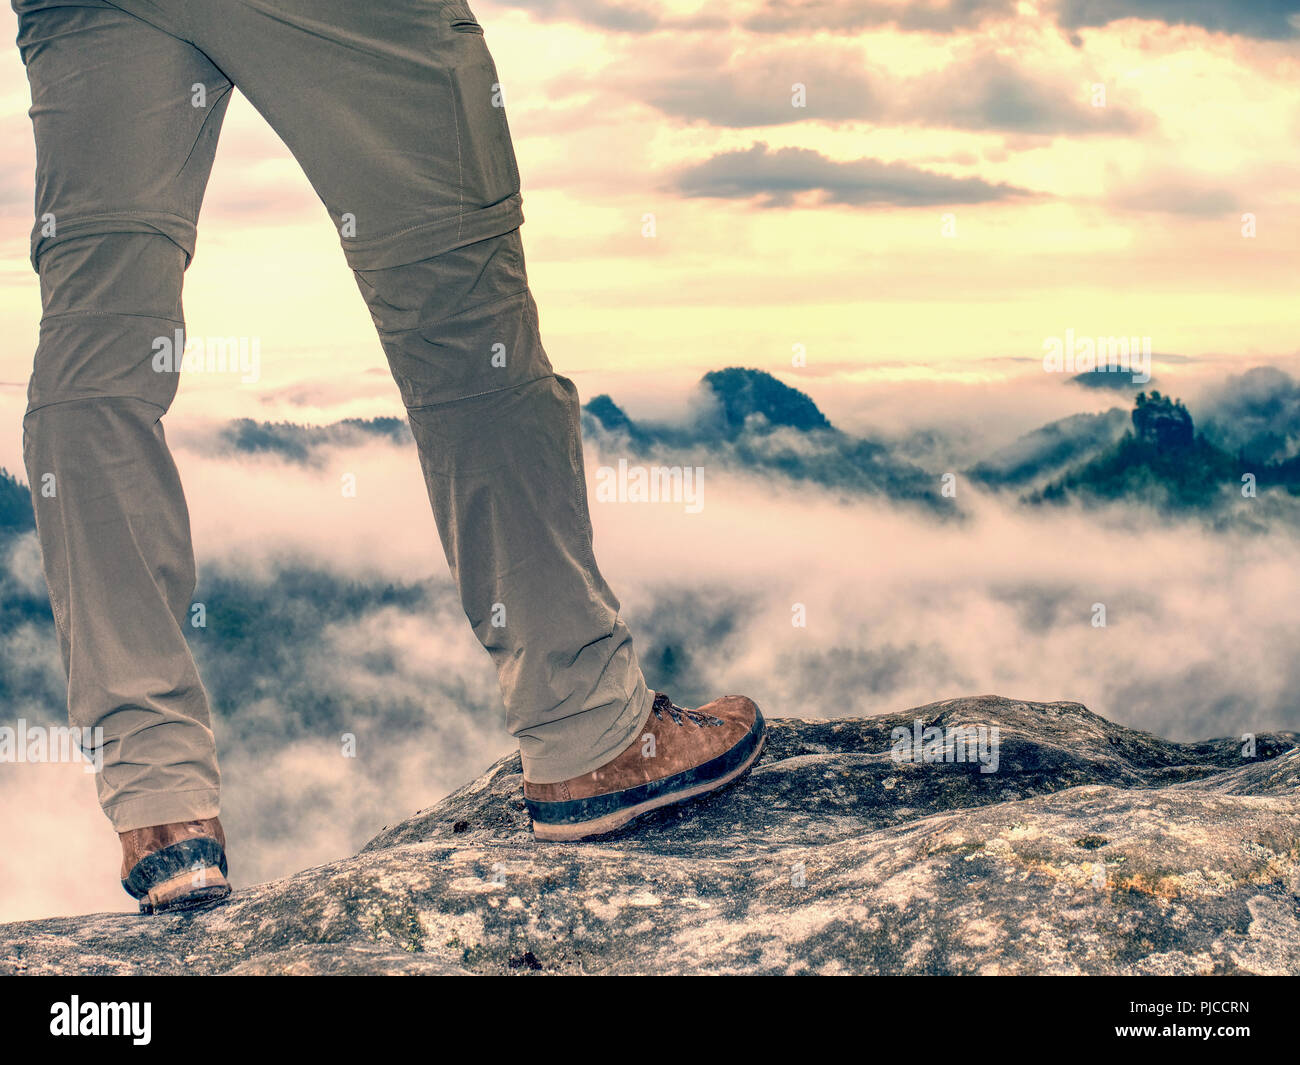 Trekking shoe and legs on rocky hiking trail in mountains motivation inspiration concept. Outdoors achievement, fitness adventure and exercising in wi Stock Photo